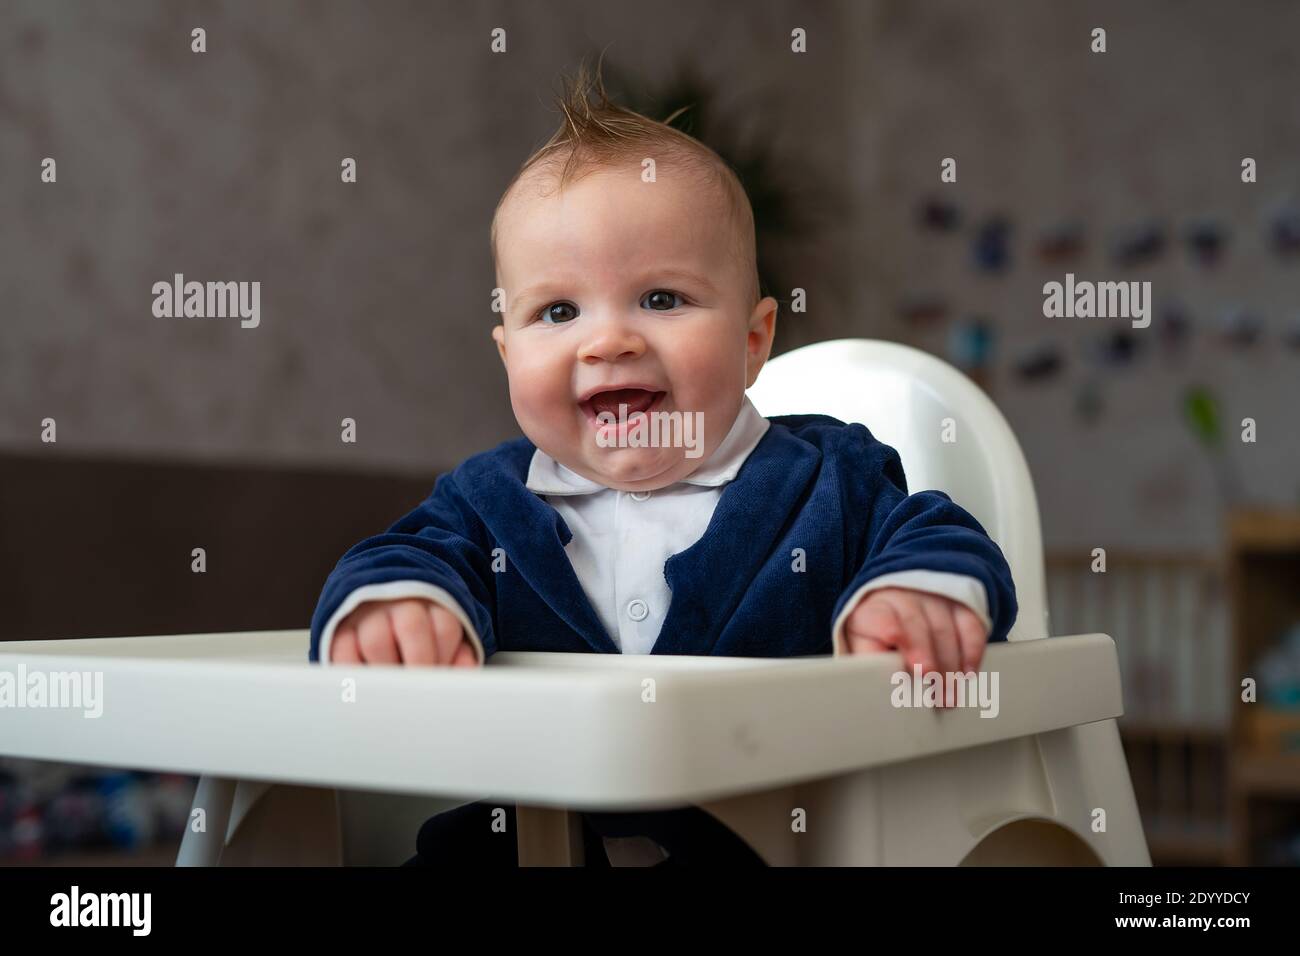 baby boy sitting in a white high chair and smiling Stock Photo